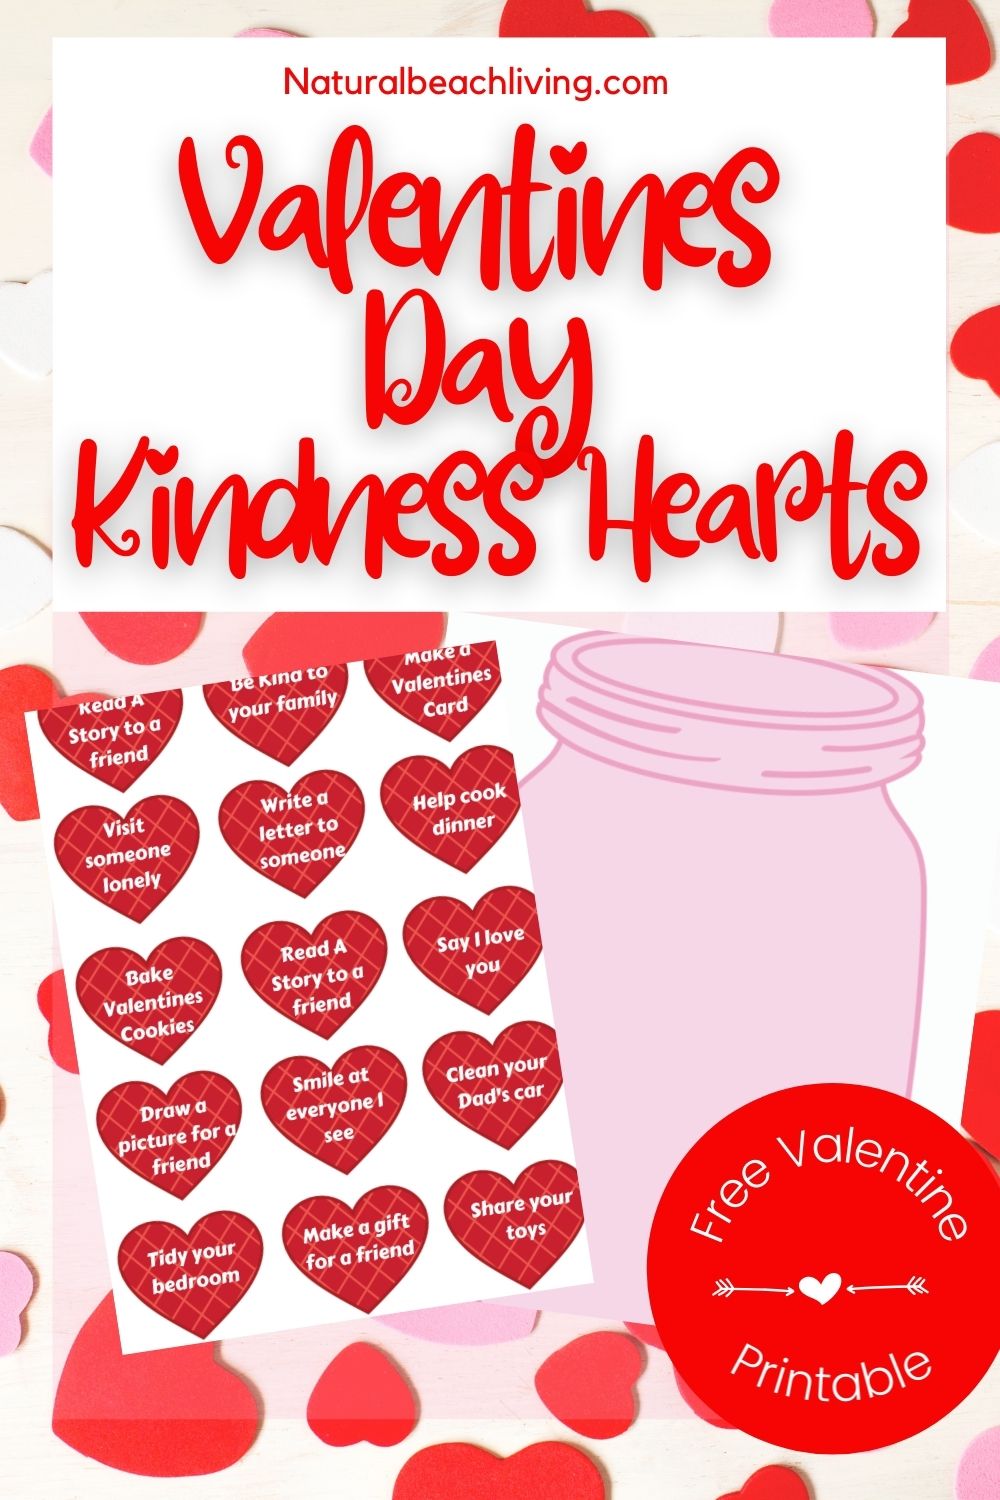 Kindness Hearts Activities and Kindness Printables